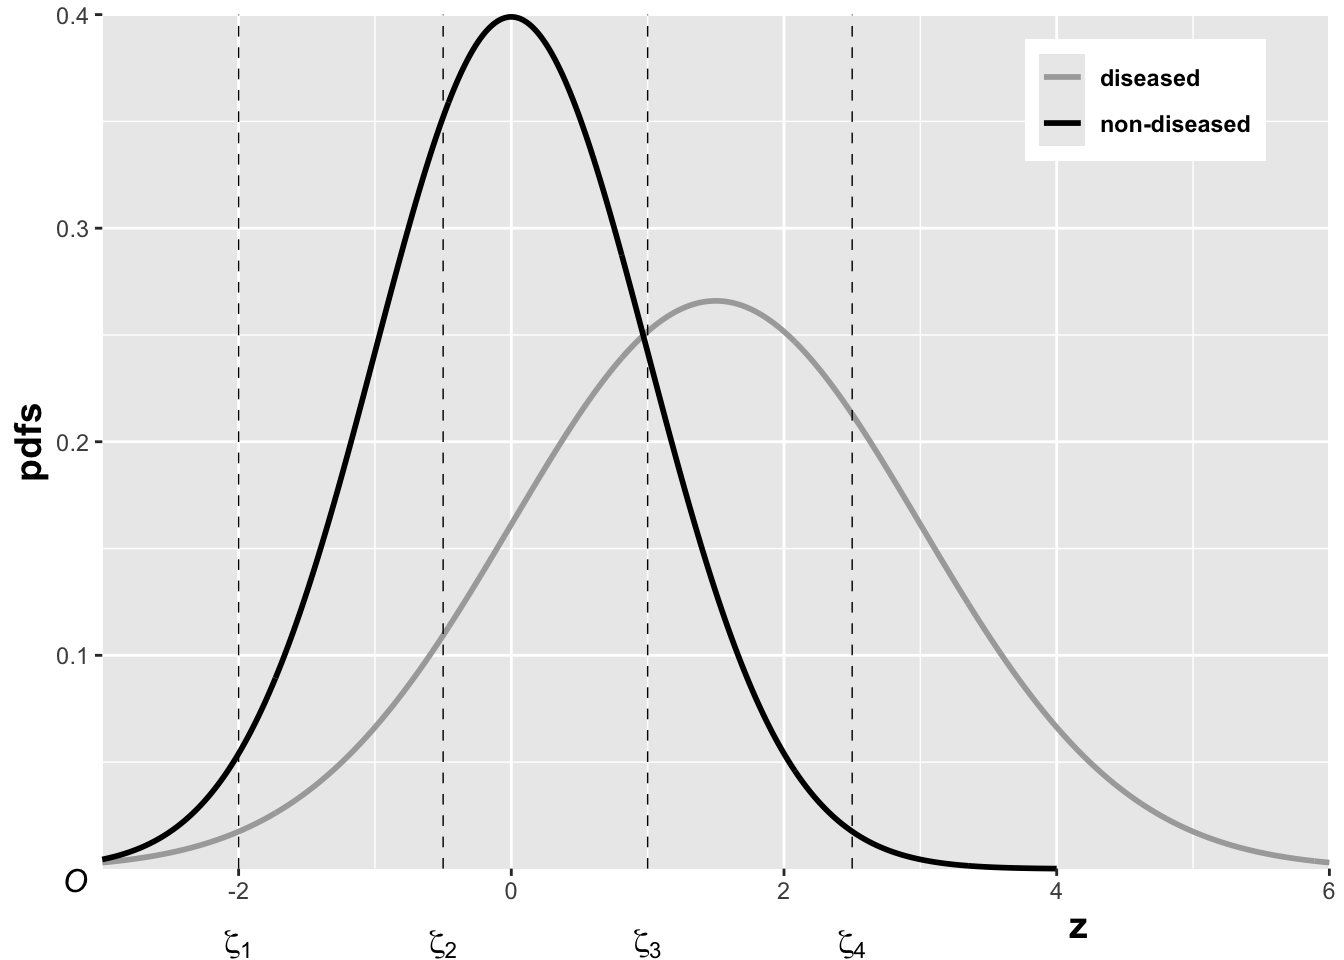 The pdfs of the two binormal model distributions for $\mu = 1.5$ and $\sigma = 1.5$. Four thresholds $\zeta_1, \zeta_2, \zeta_3, \zeta_4$ are shown corresponding to a five-rating ROC study. The rating assigned to a case is determined by its z-sample according to the binning rule.